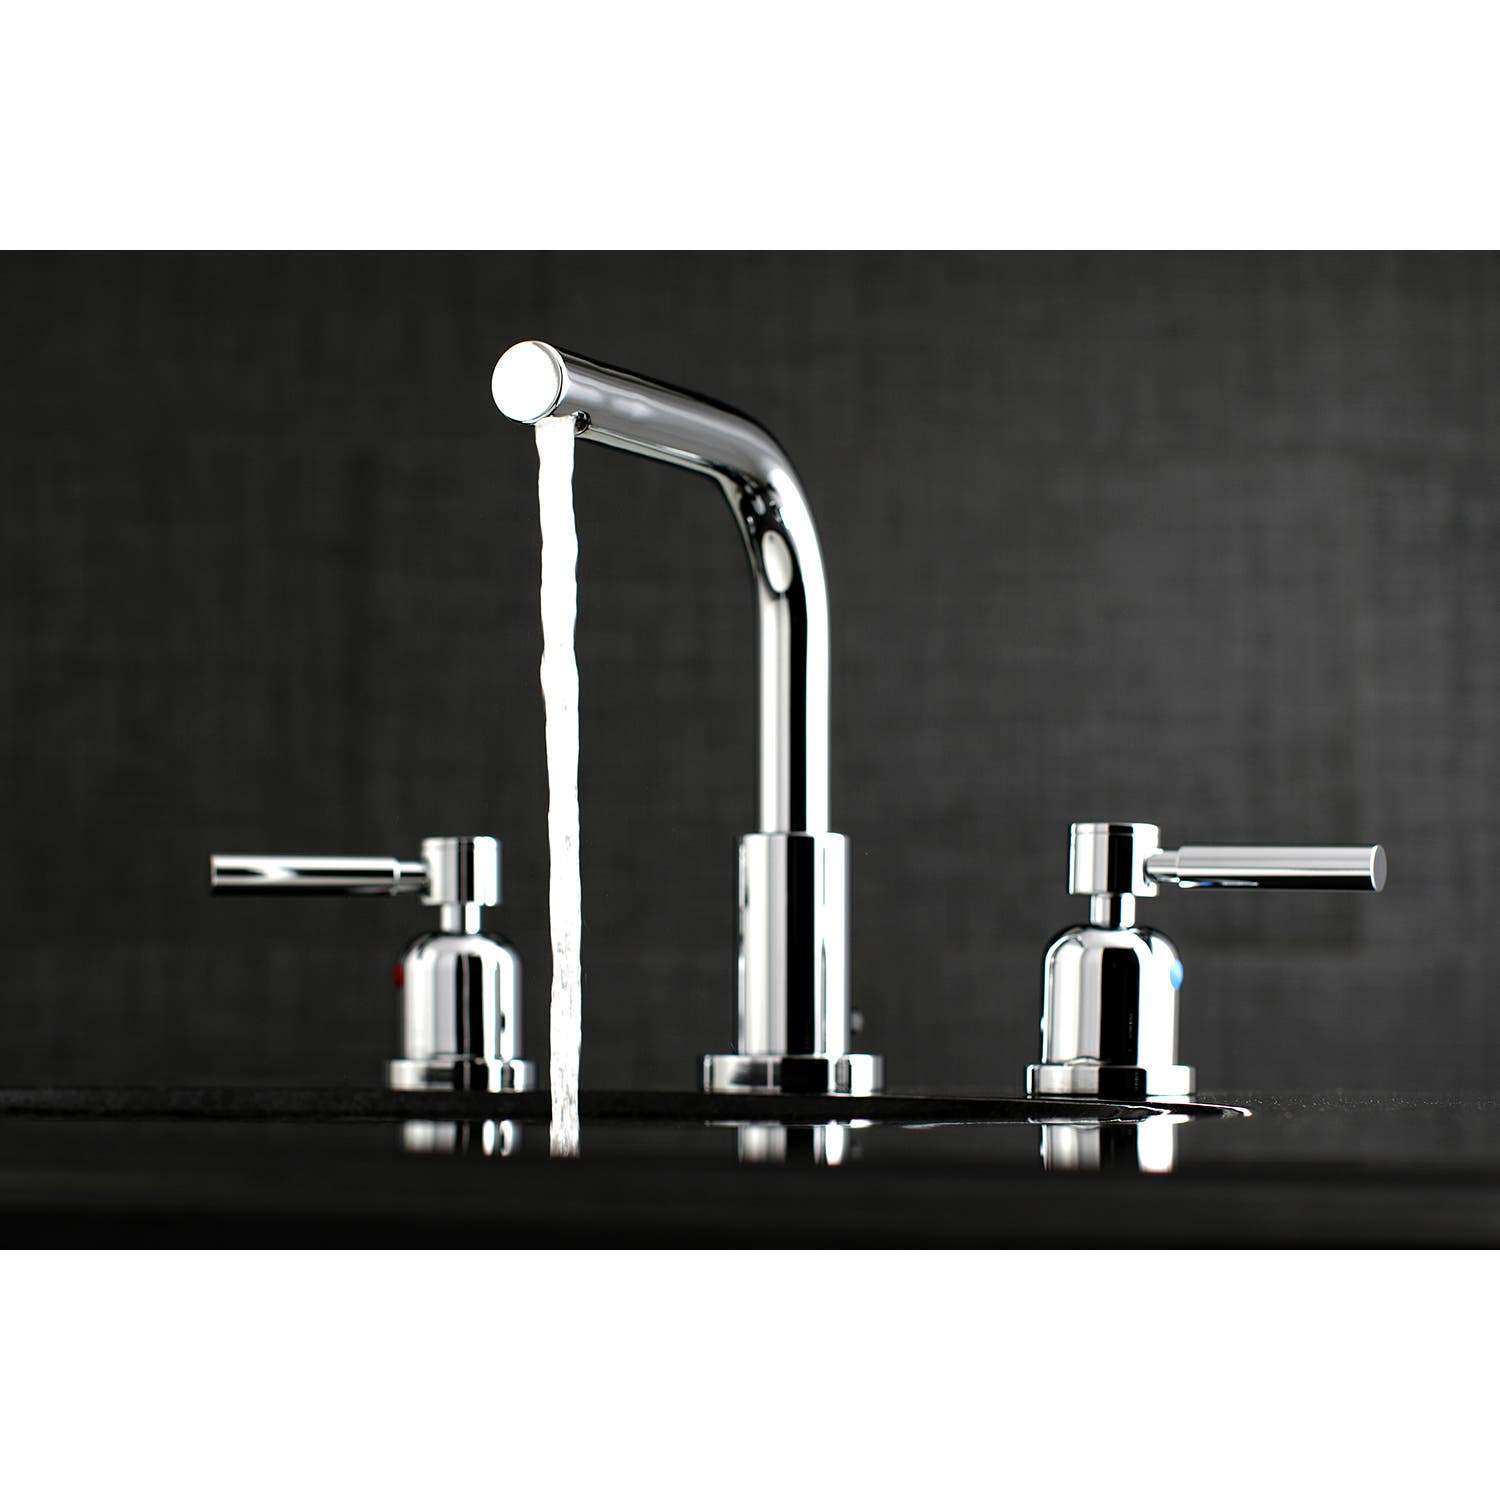 Kingston Brass Fauceture FSC895XDL-P 8 in. Widespread Bathroom Faucet